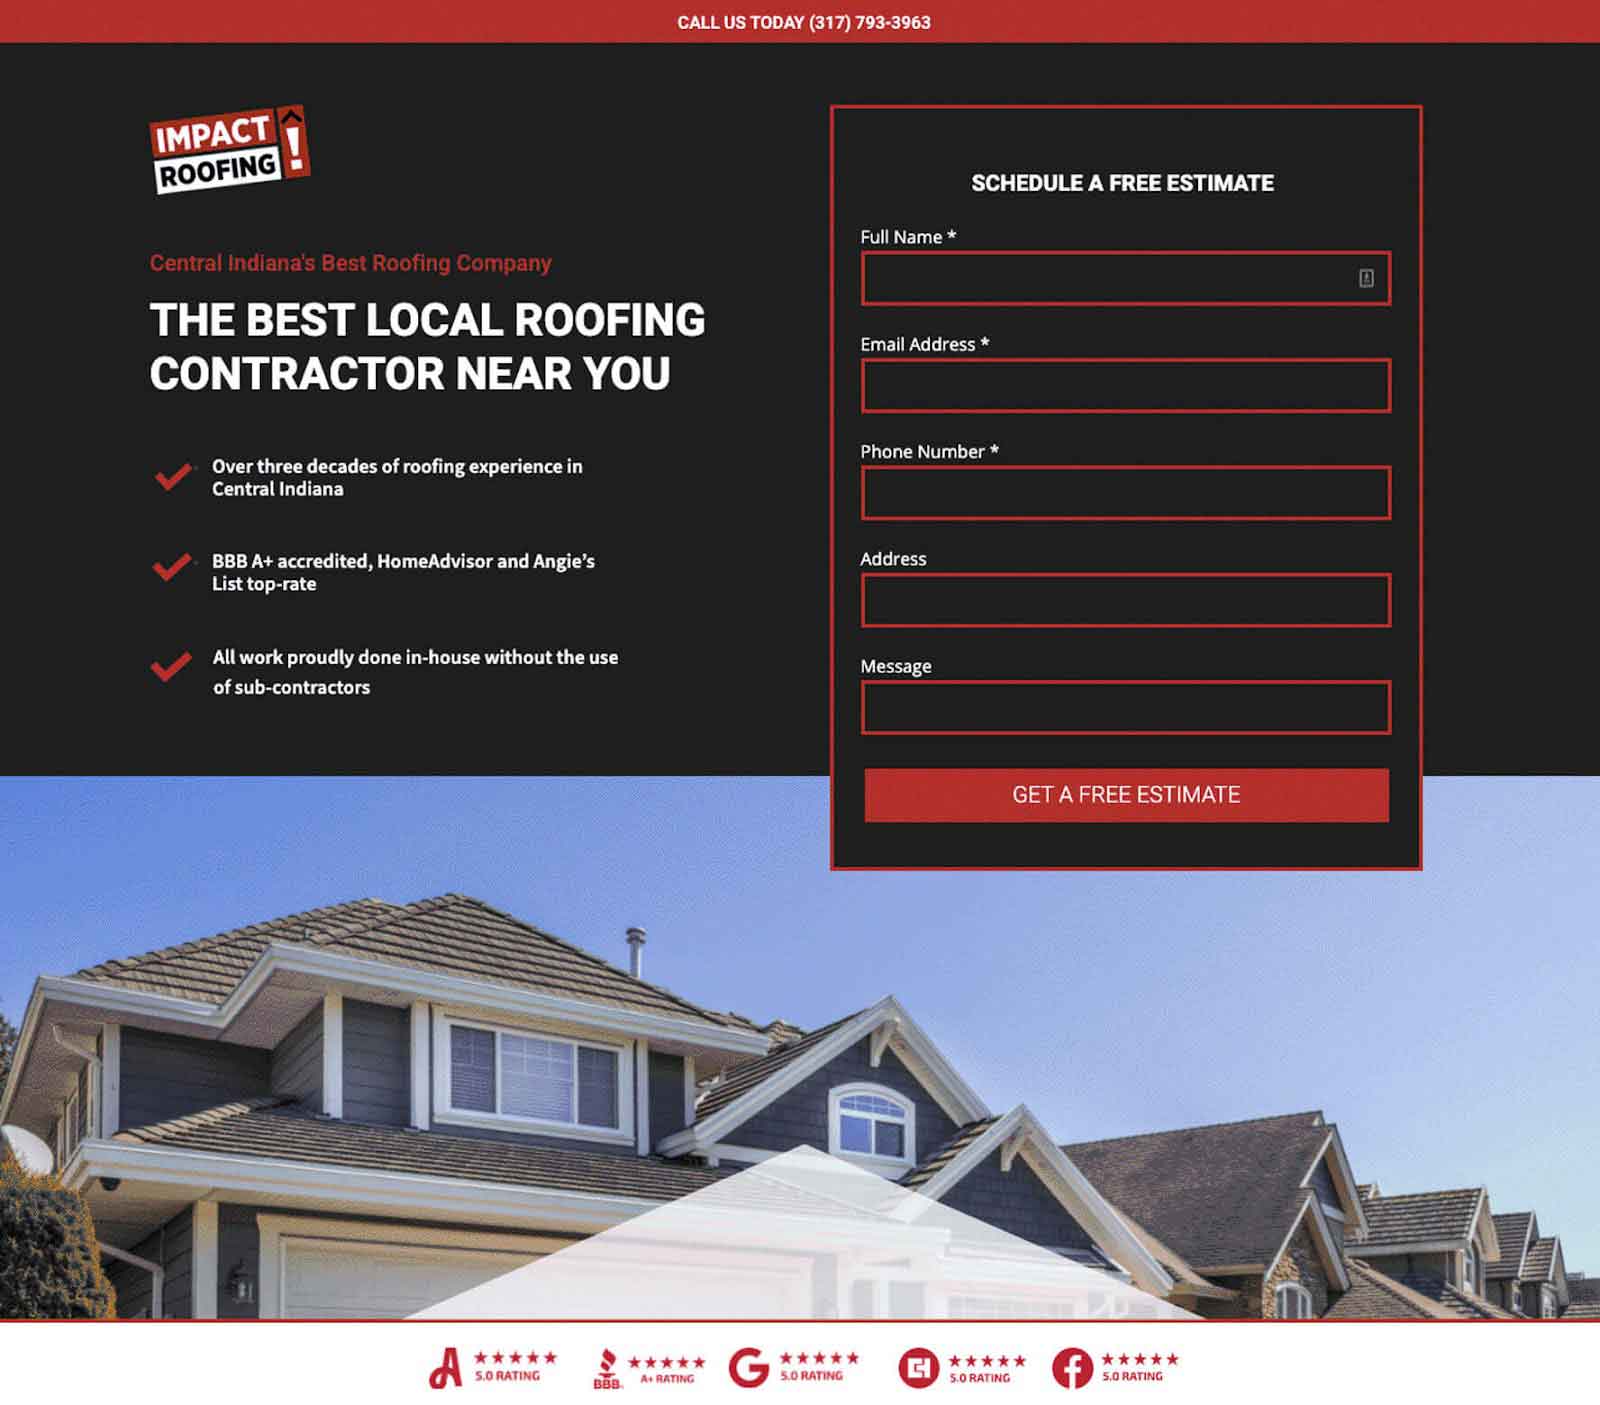 Screengrab of the Impact Roofing's landing page with a black background